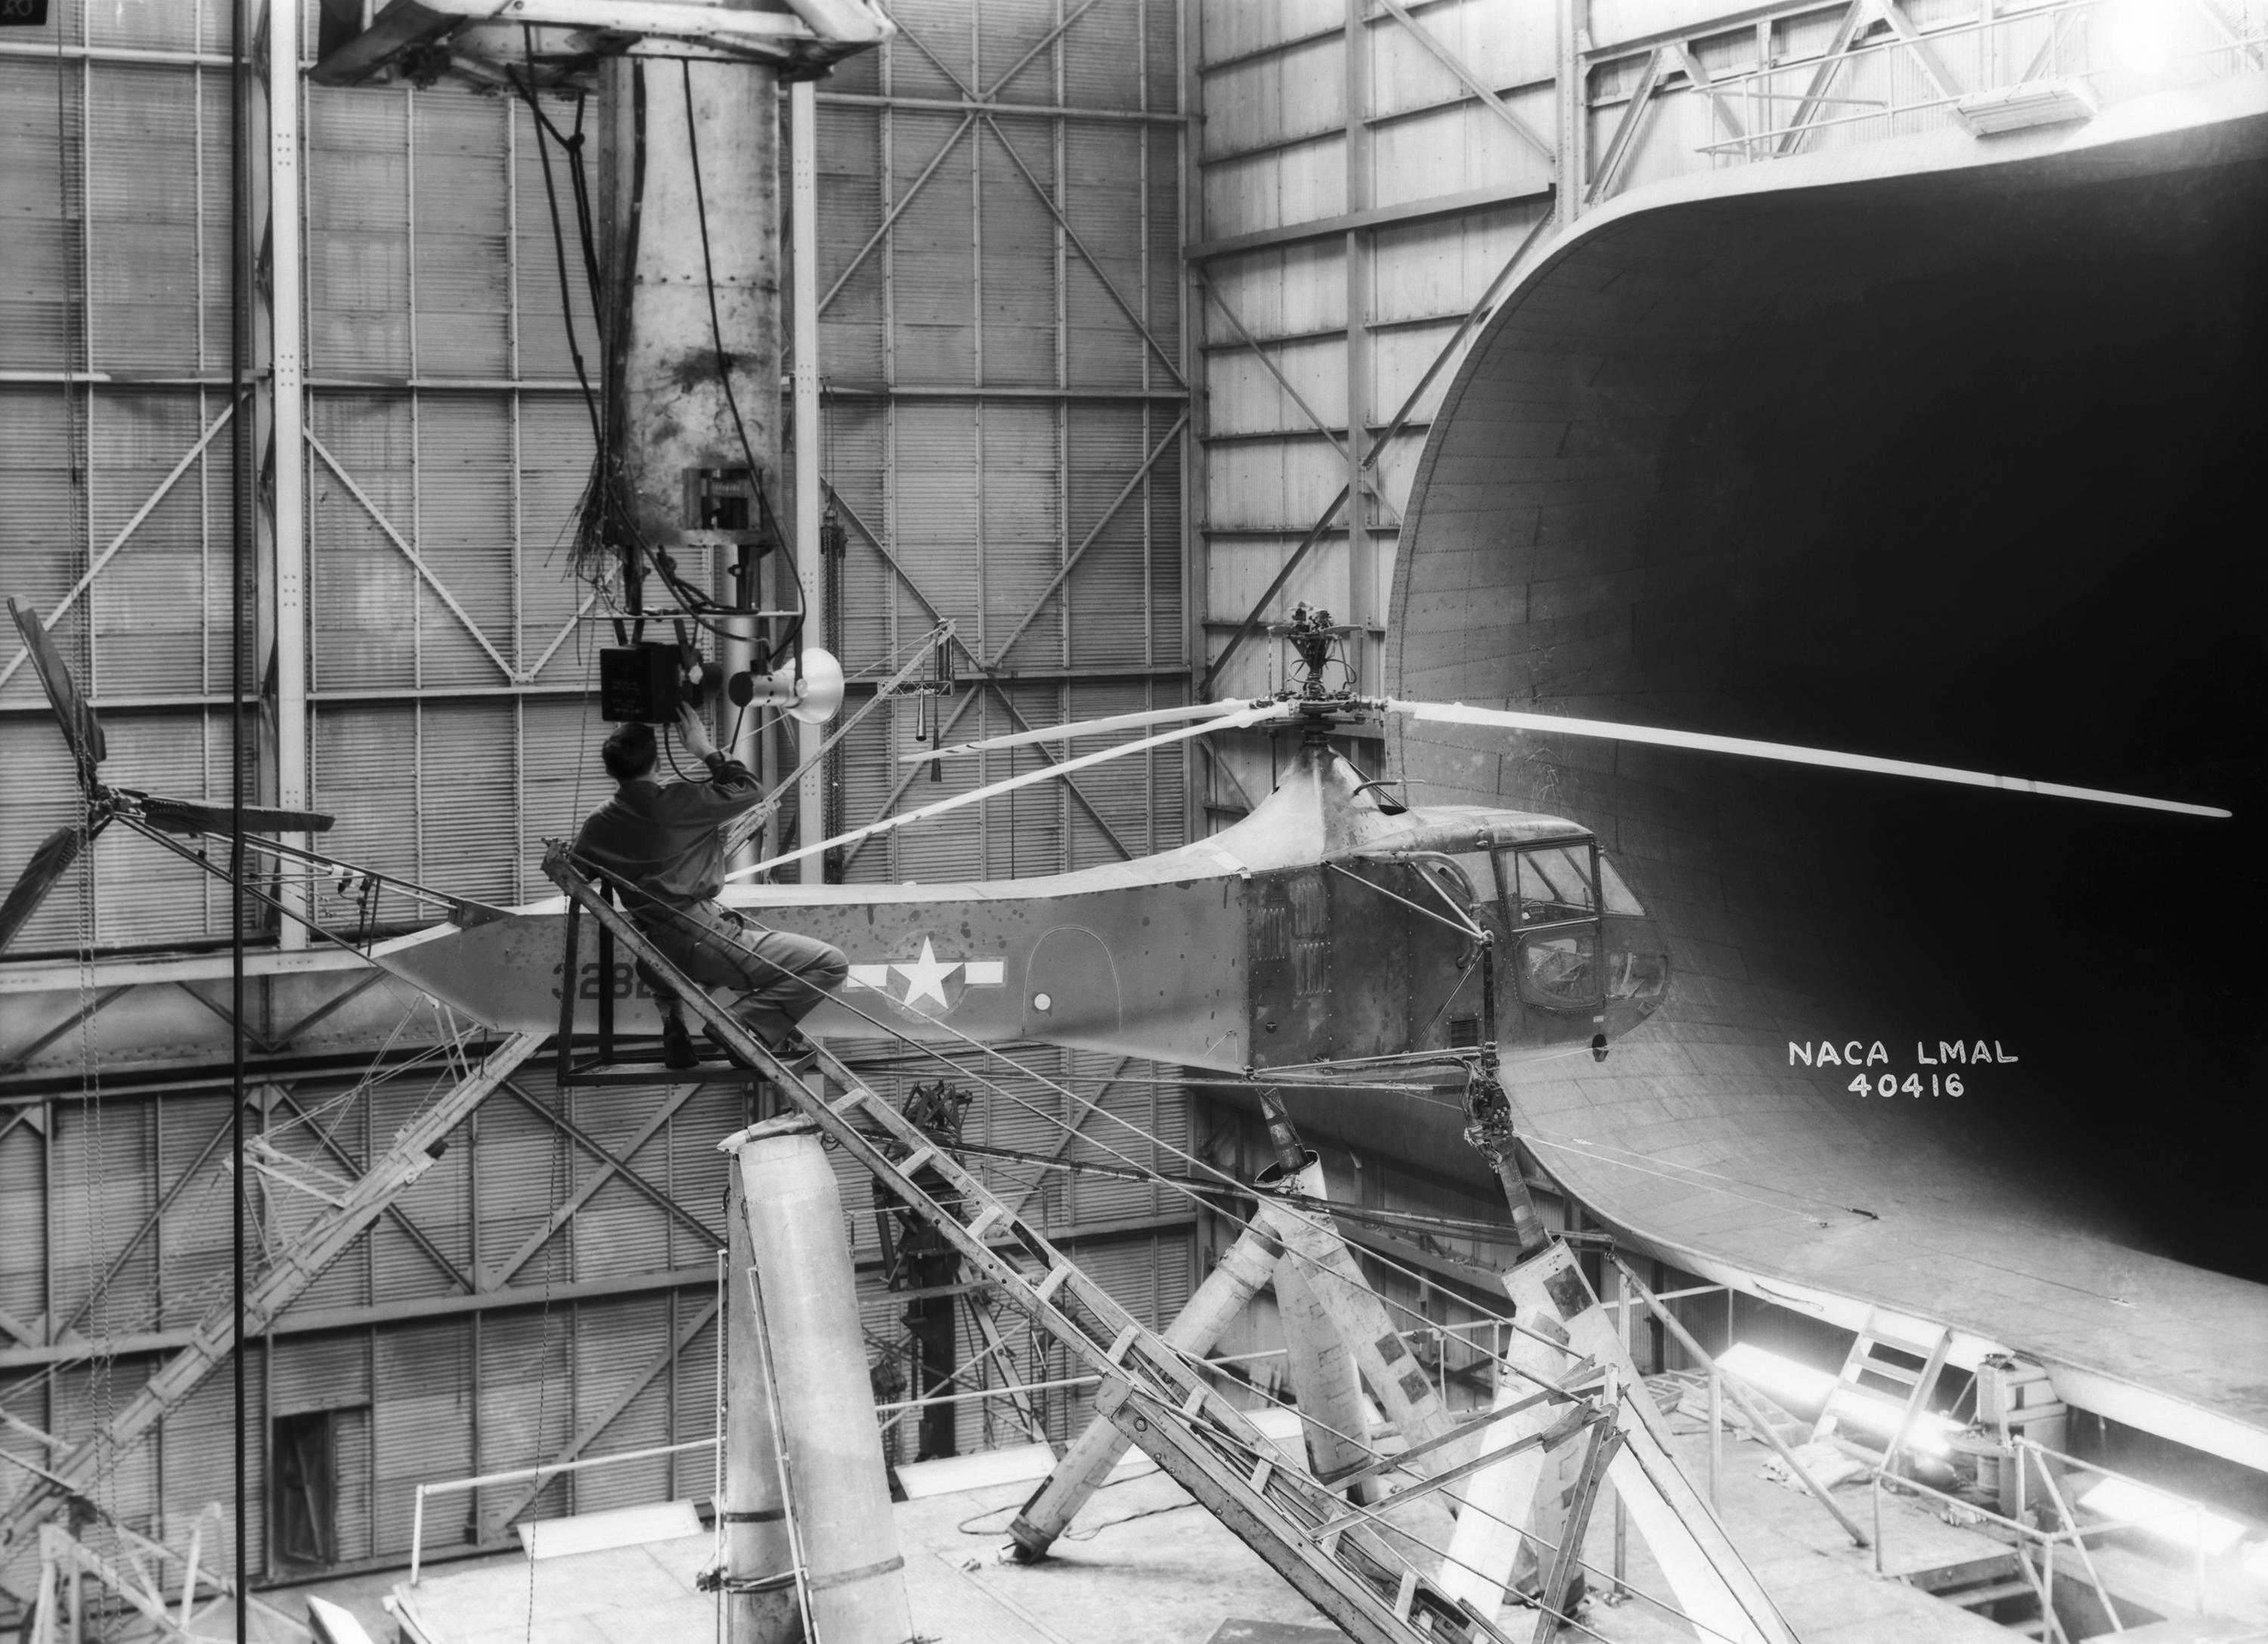 Sikorsky YR-4B 43-28225 in the NACA full scale wind tunnel, Langley Field, Virginia, 1944. A technician is preparing strobes to take stop-motion photographs of the helicopter's rotor blades while they turn at normal operating r.p.m. (NASA)